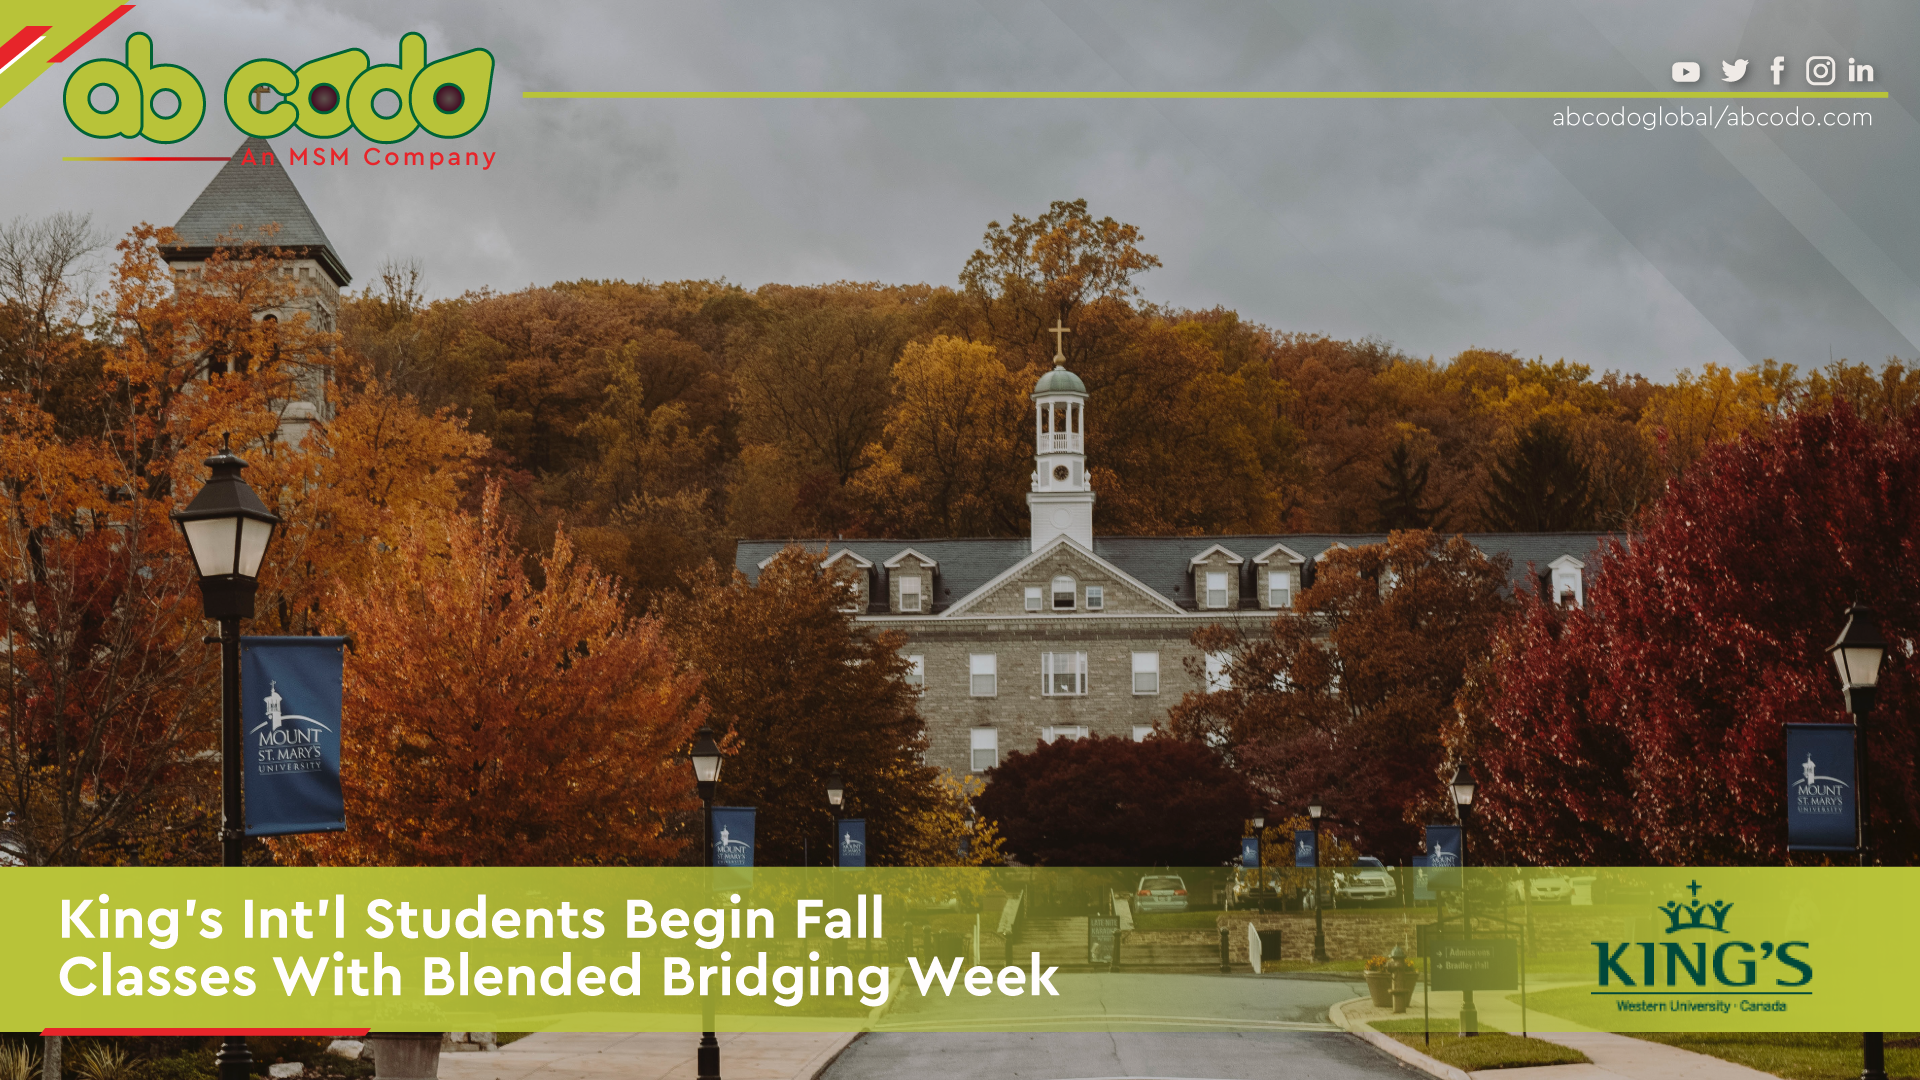 King’s Int’l Students Begin Fall Classes With Blended Bridging Week